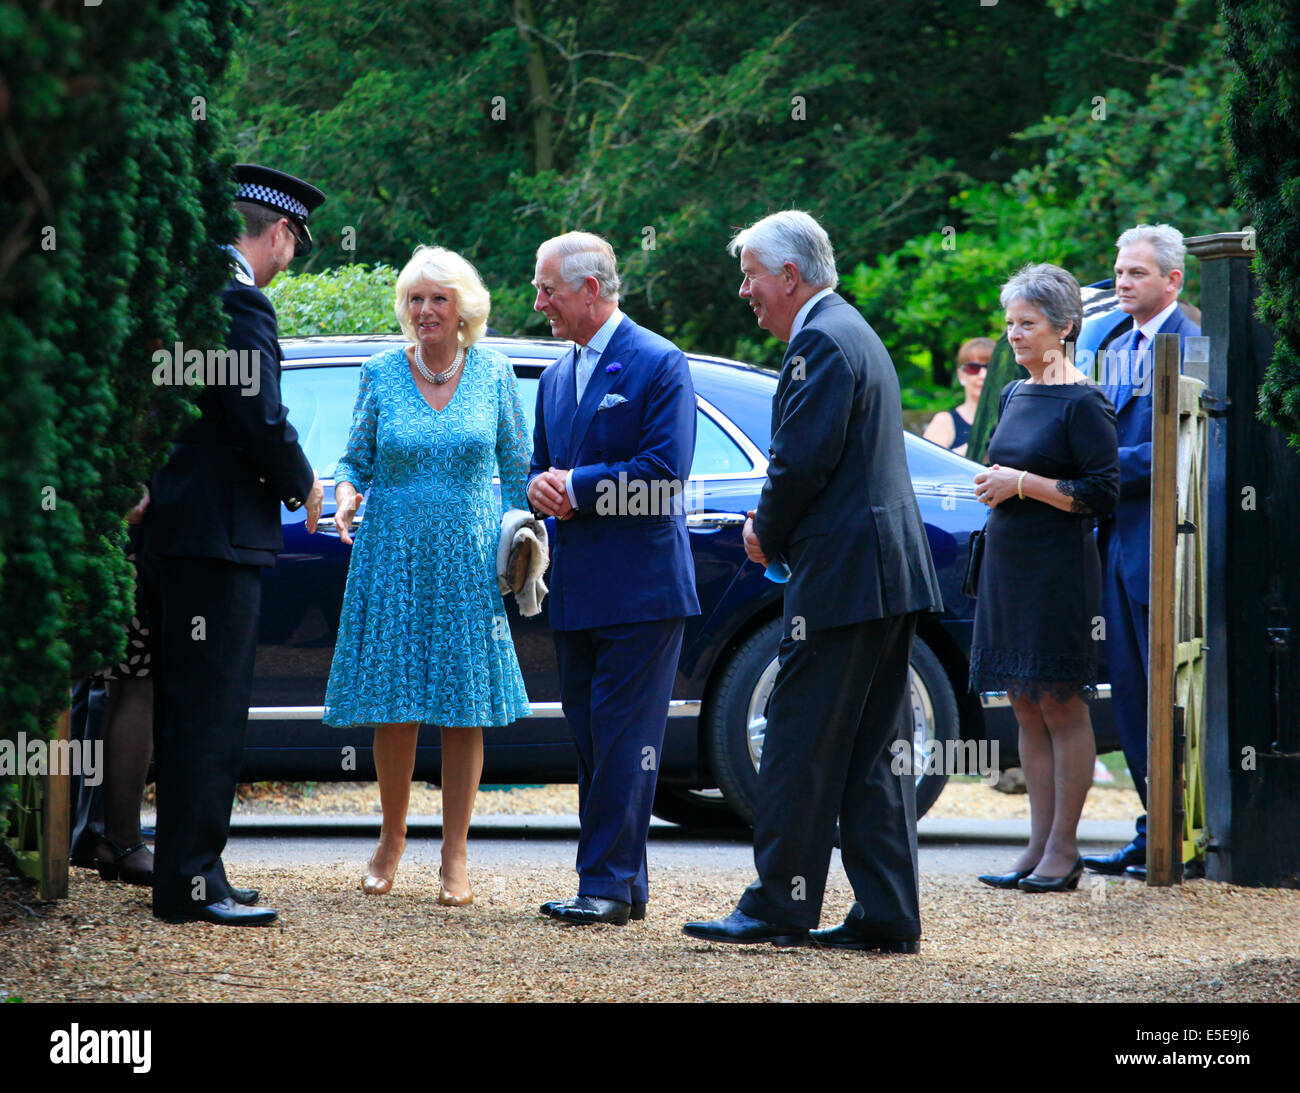 St Mary's church, Old Hunstanton, Norfolk, England, UK. 29 July 2014. HRH The Prince of Wales and HRH The Duchess of Cornwall arrive at St Mary's church, Old Hunstanton, to attend a Music in Country Churches concert in Norfolk. Founded in 1989, Music in Country Churches was set up with the support of the Prince of Wales, with the aim of bringing world-class musicians to country churches of particular beauty and importance. Credit:  Stuart Aylmer/Alamy Live News Stock Photo